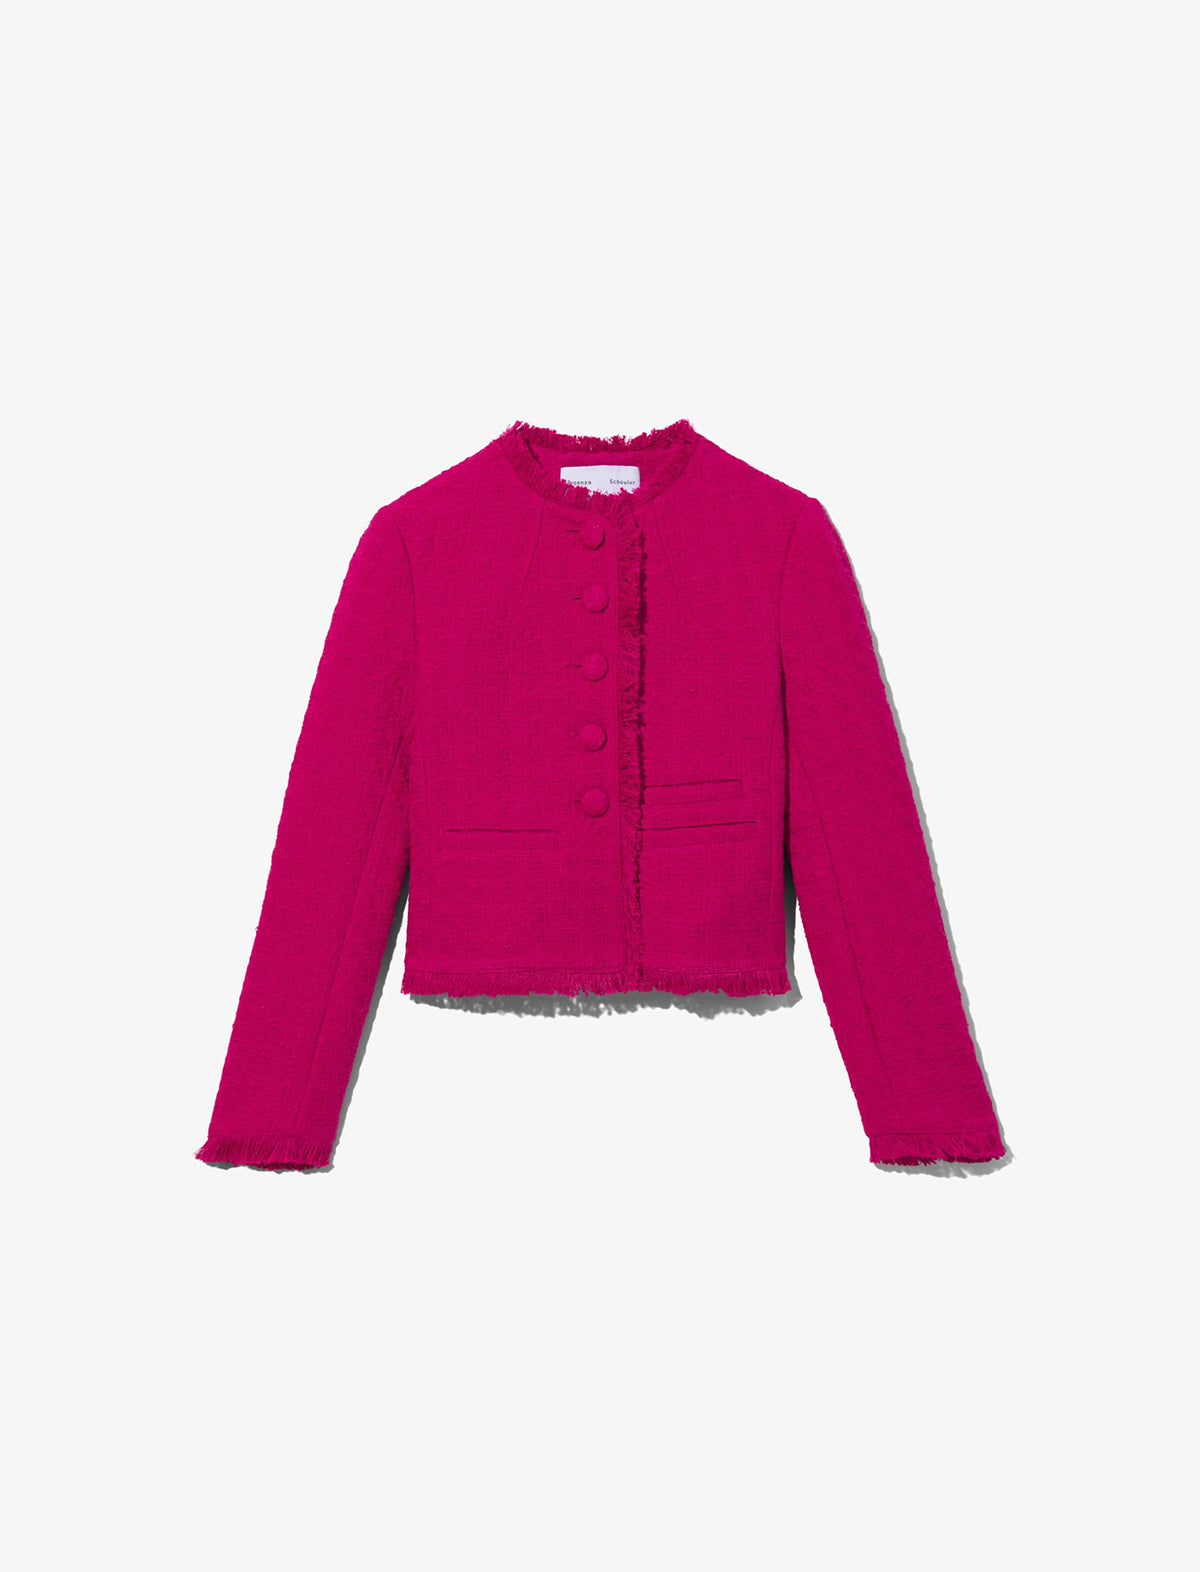 PROENZA SCHOULER WHITE LABEL Cropped Tweed Jacket in Pink